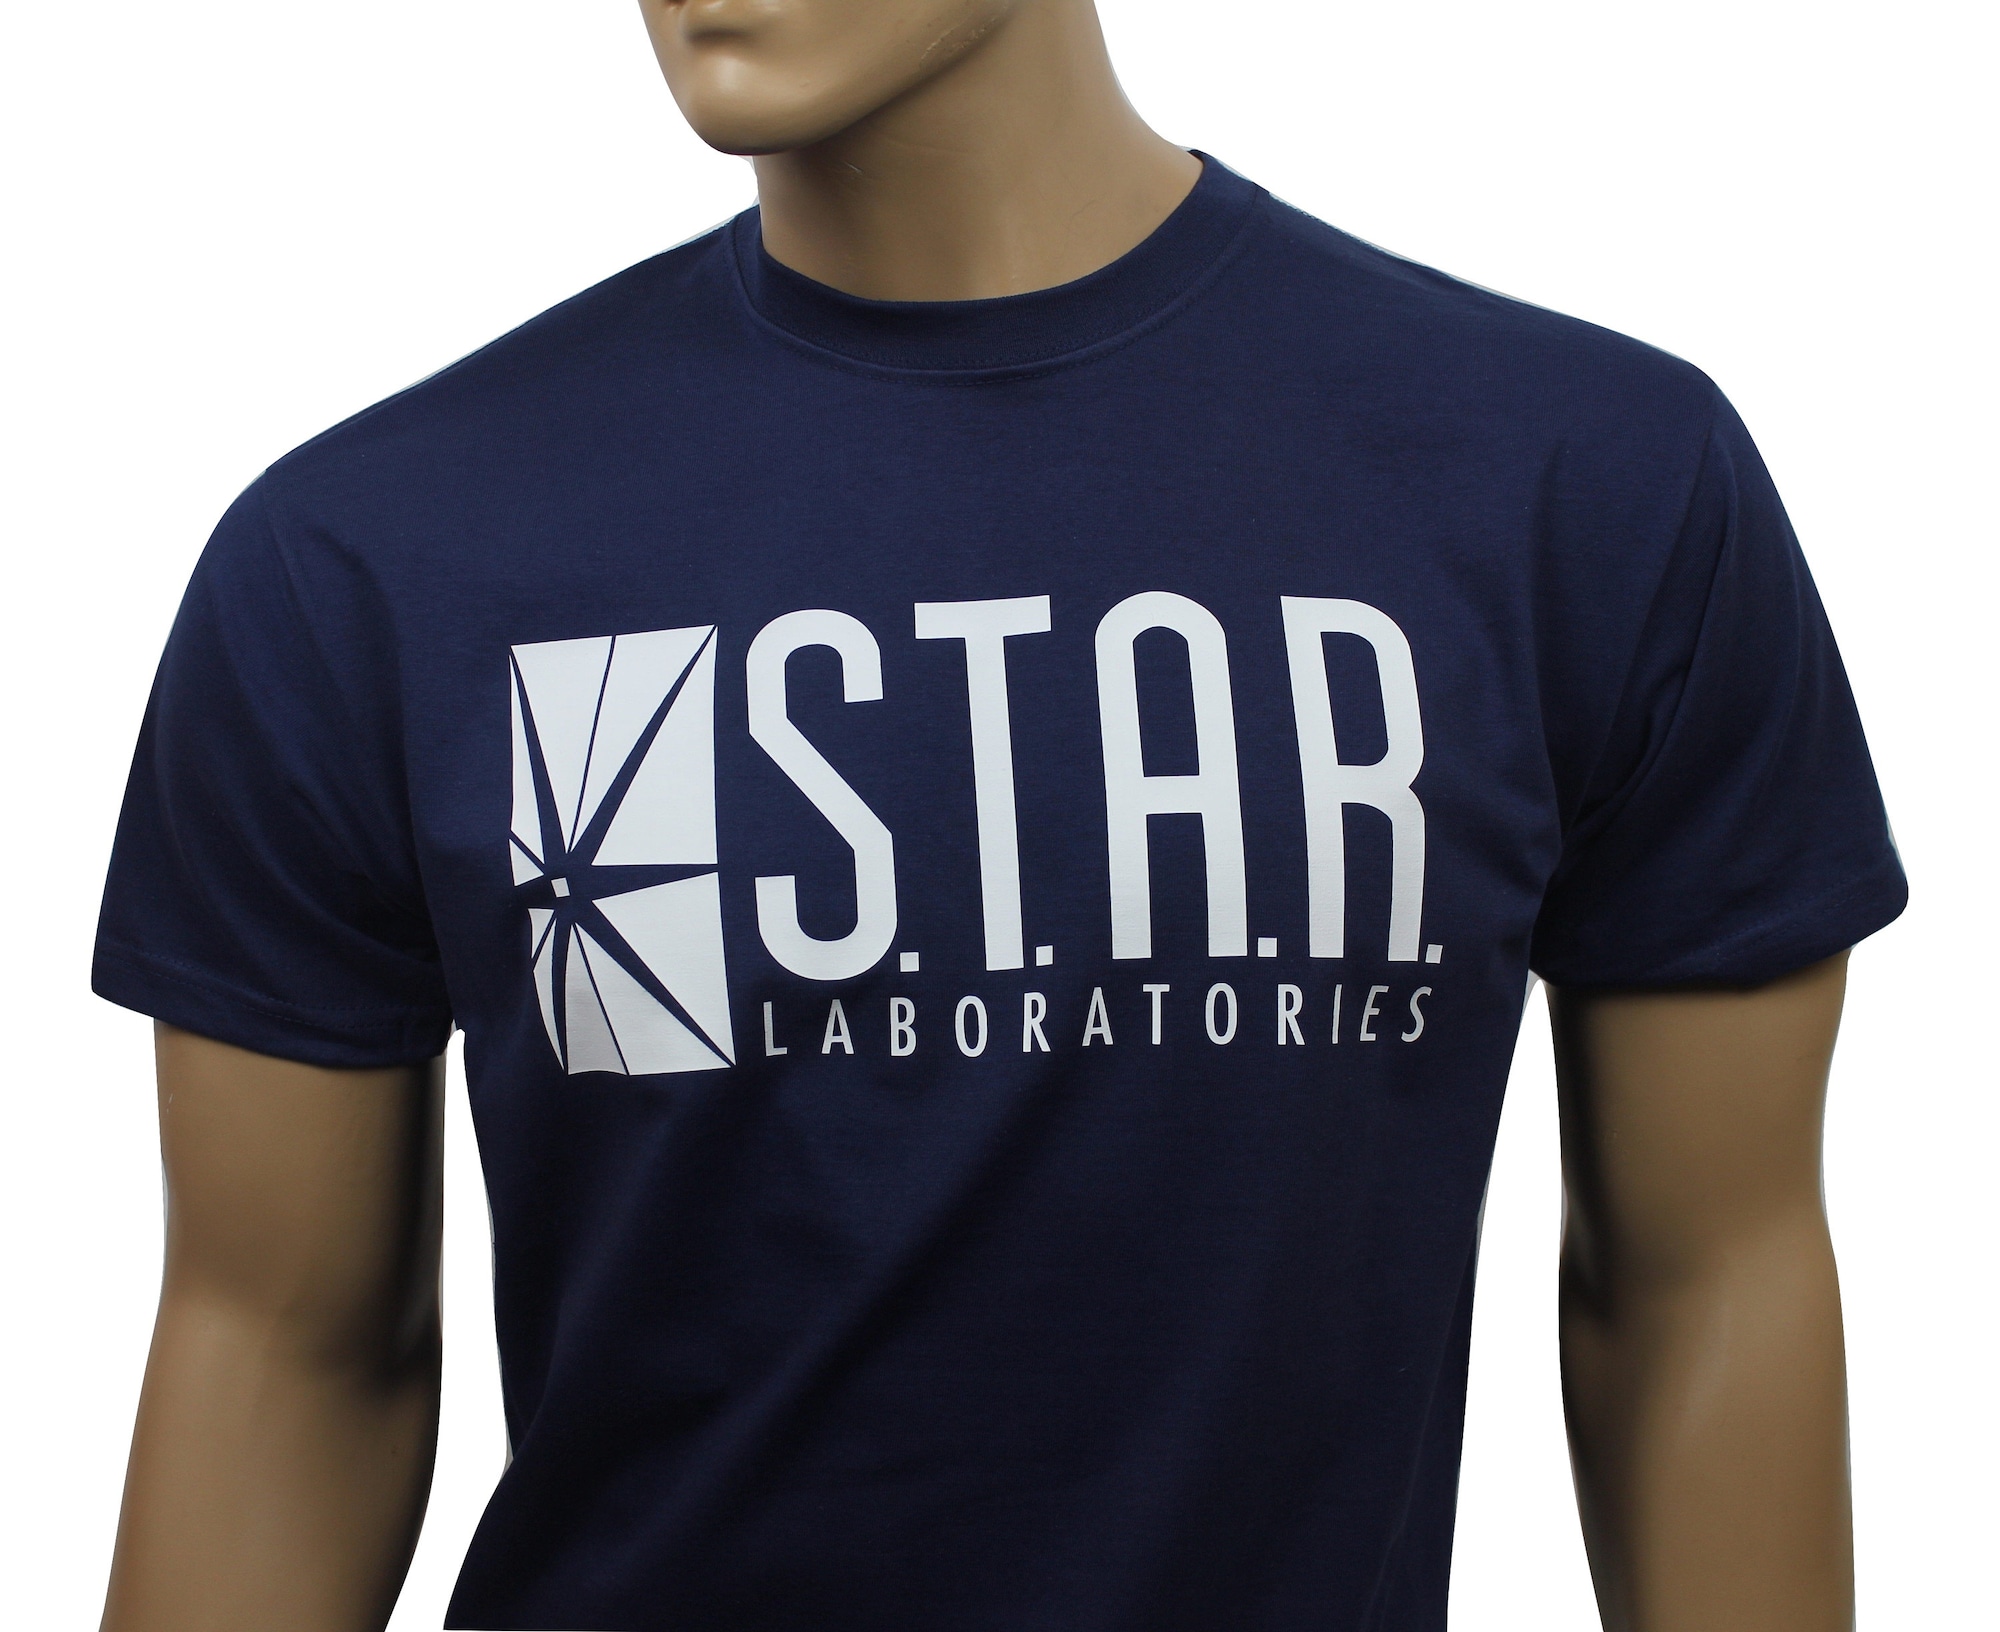 Discover Star Laboratories t-shirt